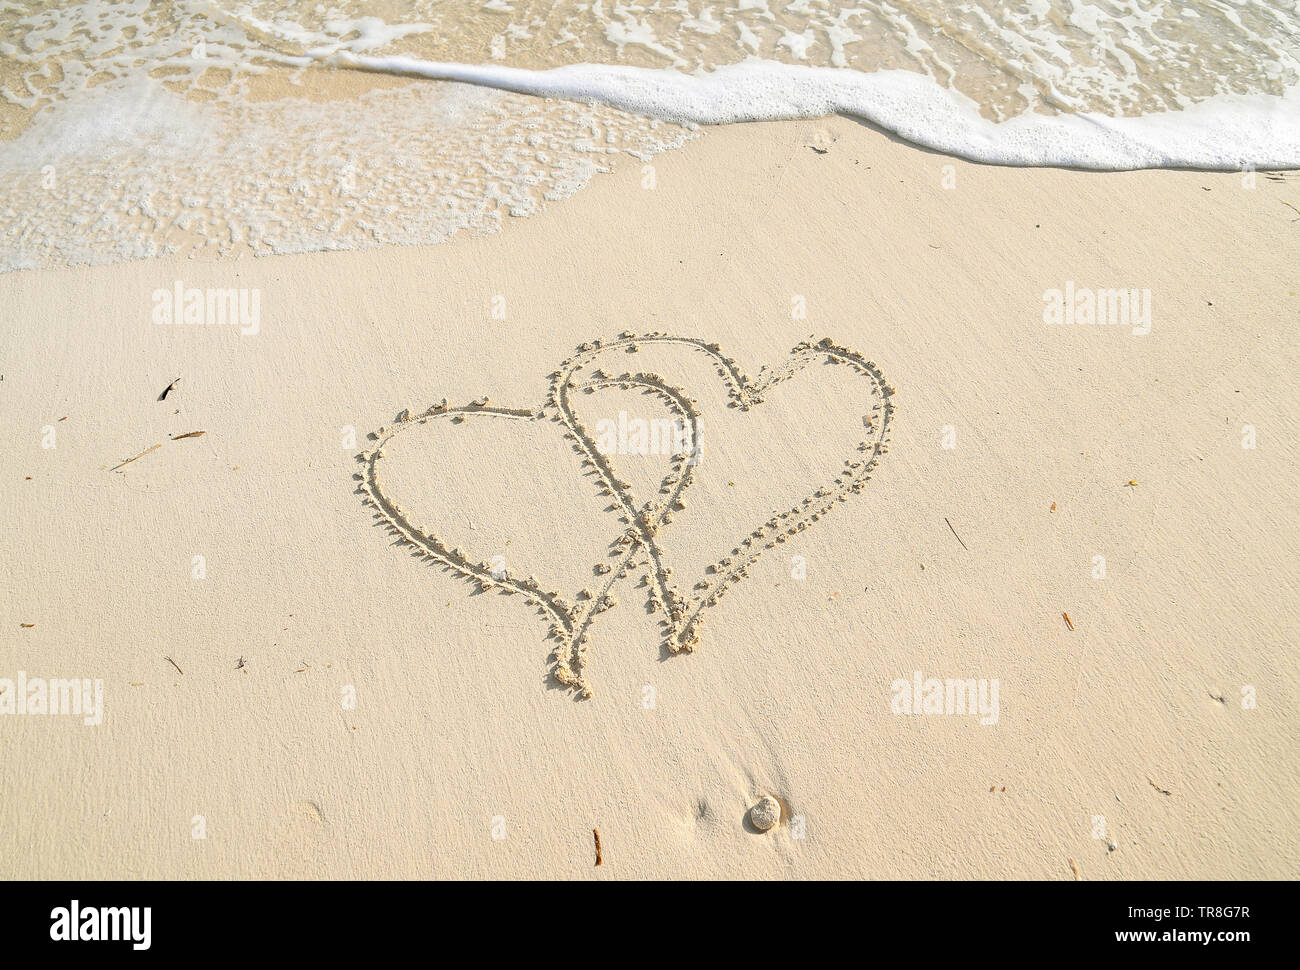 pair of connected heart symbols in beach sand with white frothy ocean surf Stock Photo